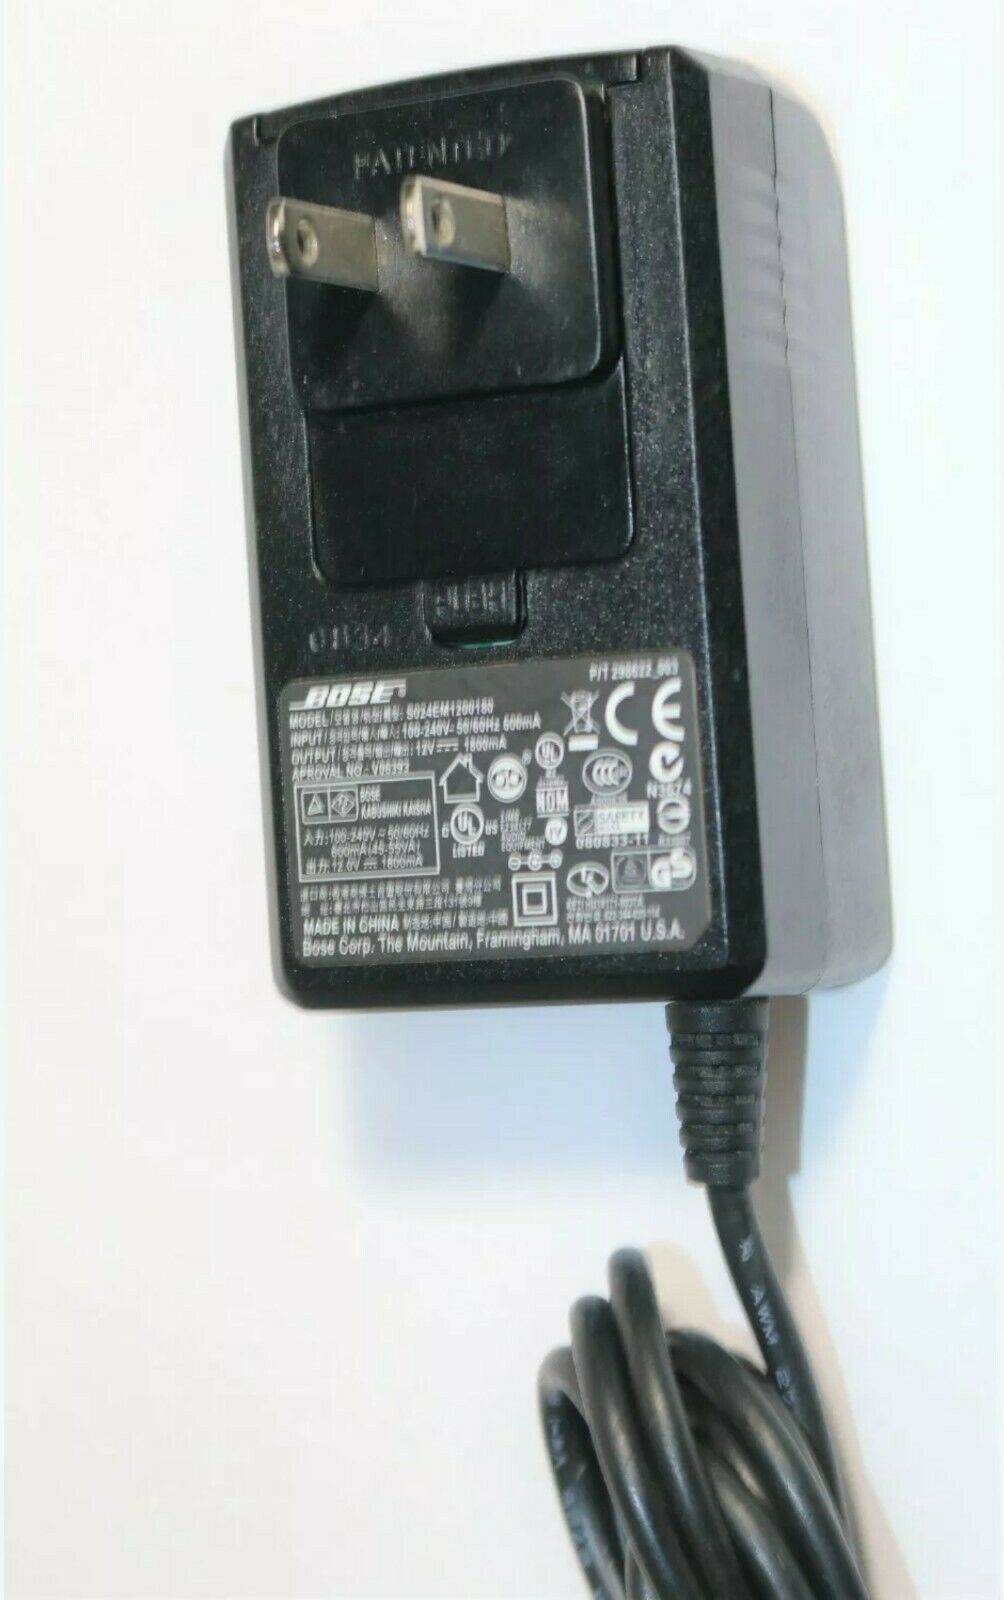 NEW Bose Stereo 12V 1800mA Power Supply Charger Cable S024EM1200180 Companion 2 Series